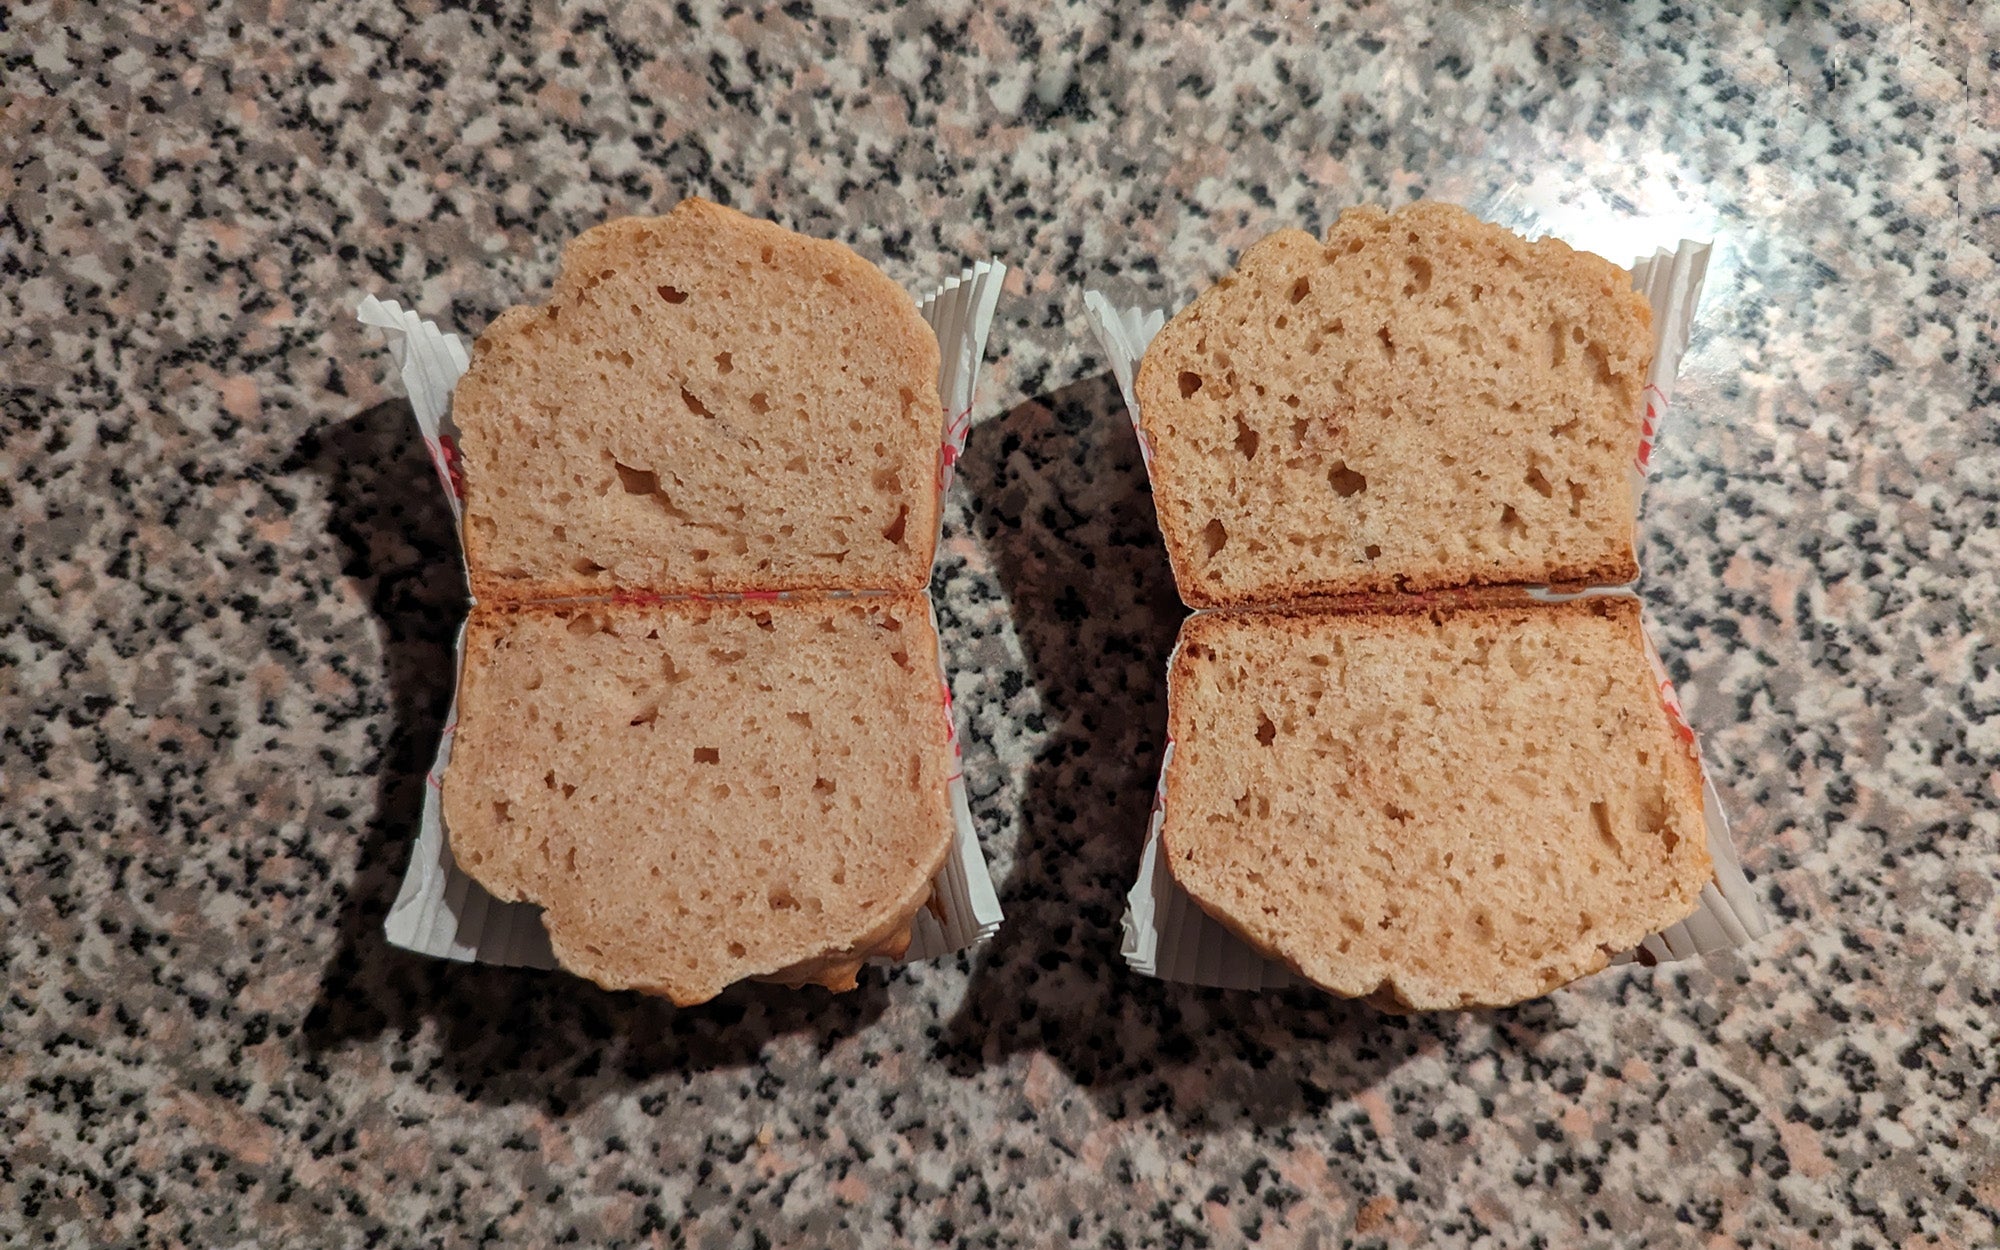 two muffins cut in half to show their inner texture